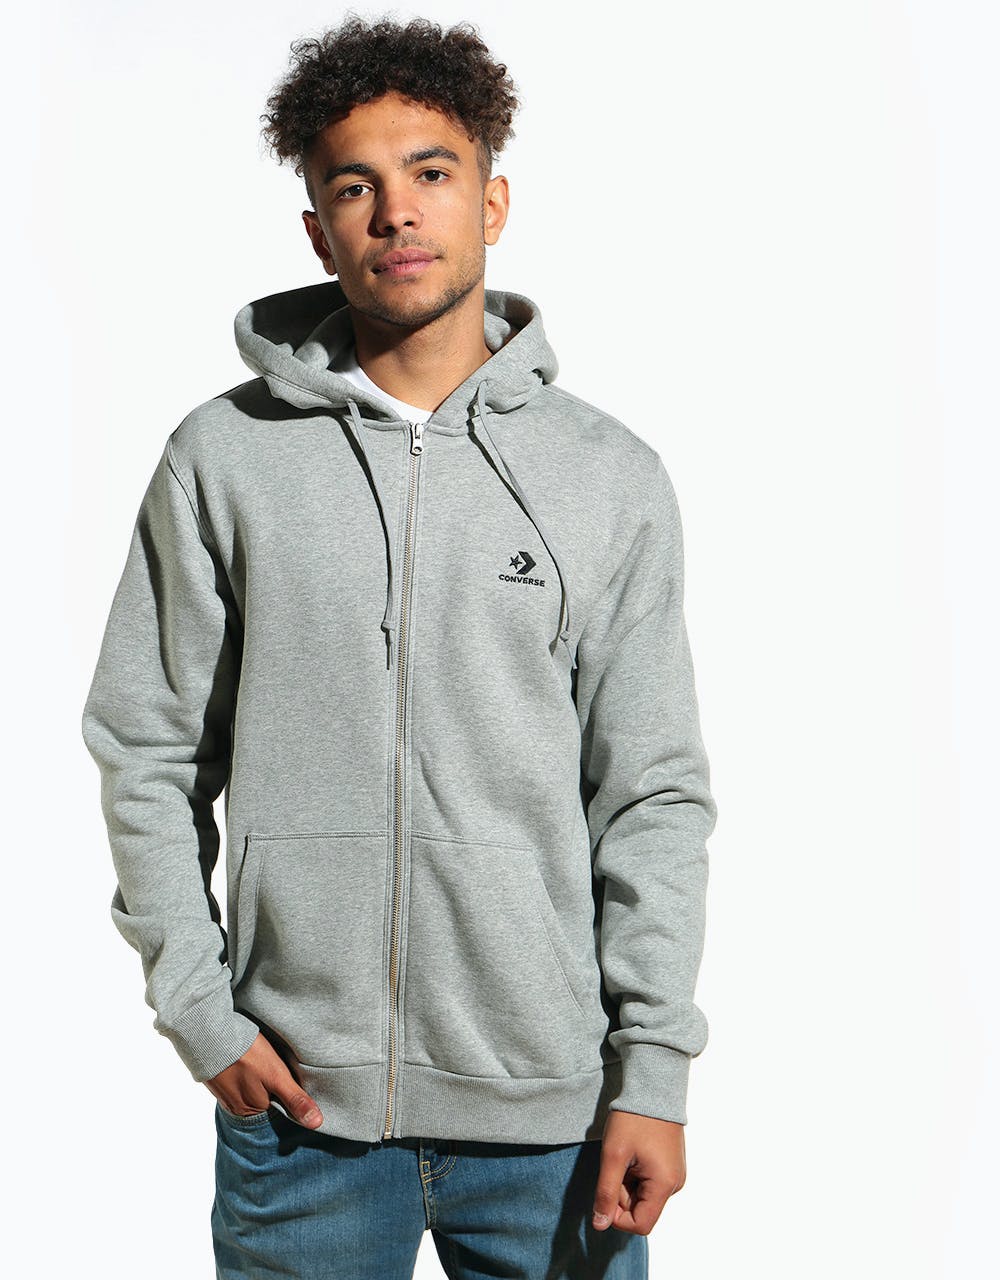 – One Grey FZ Heather Route Converse Vintage - Hoodie Embroidered Star Chevron